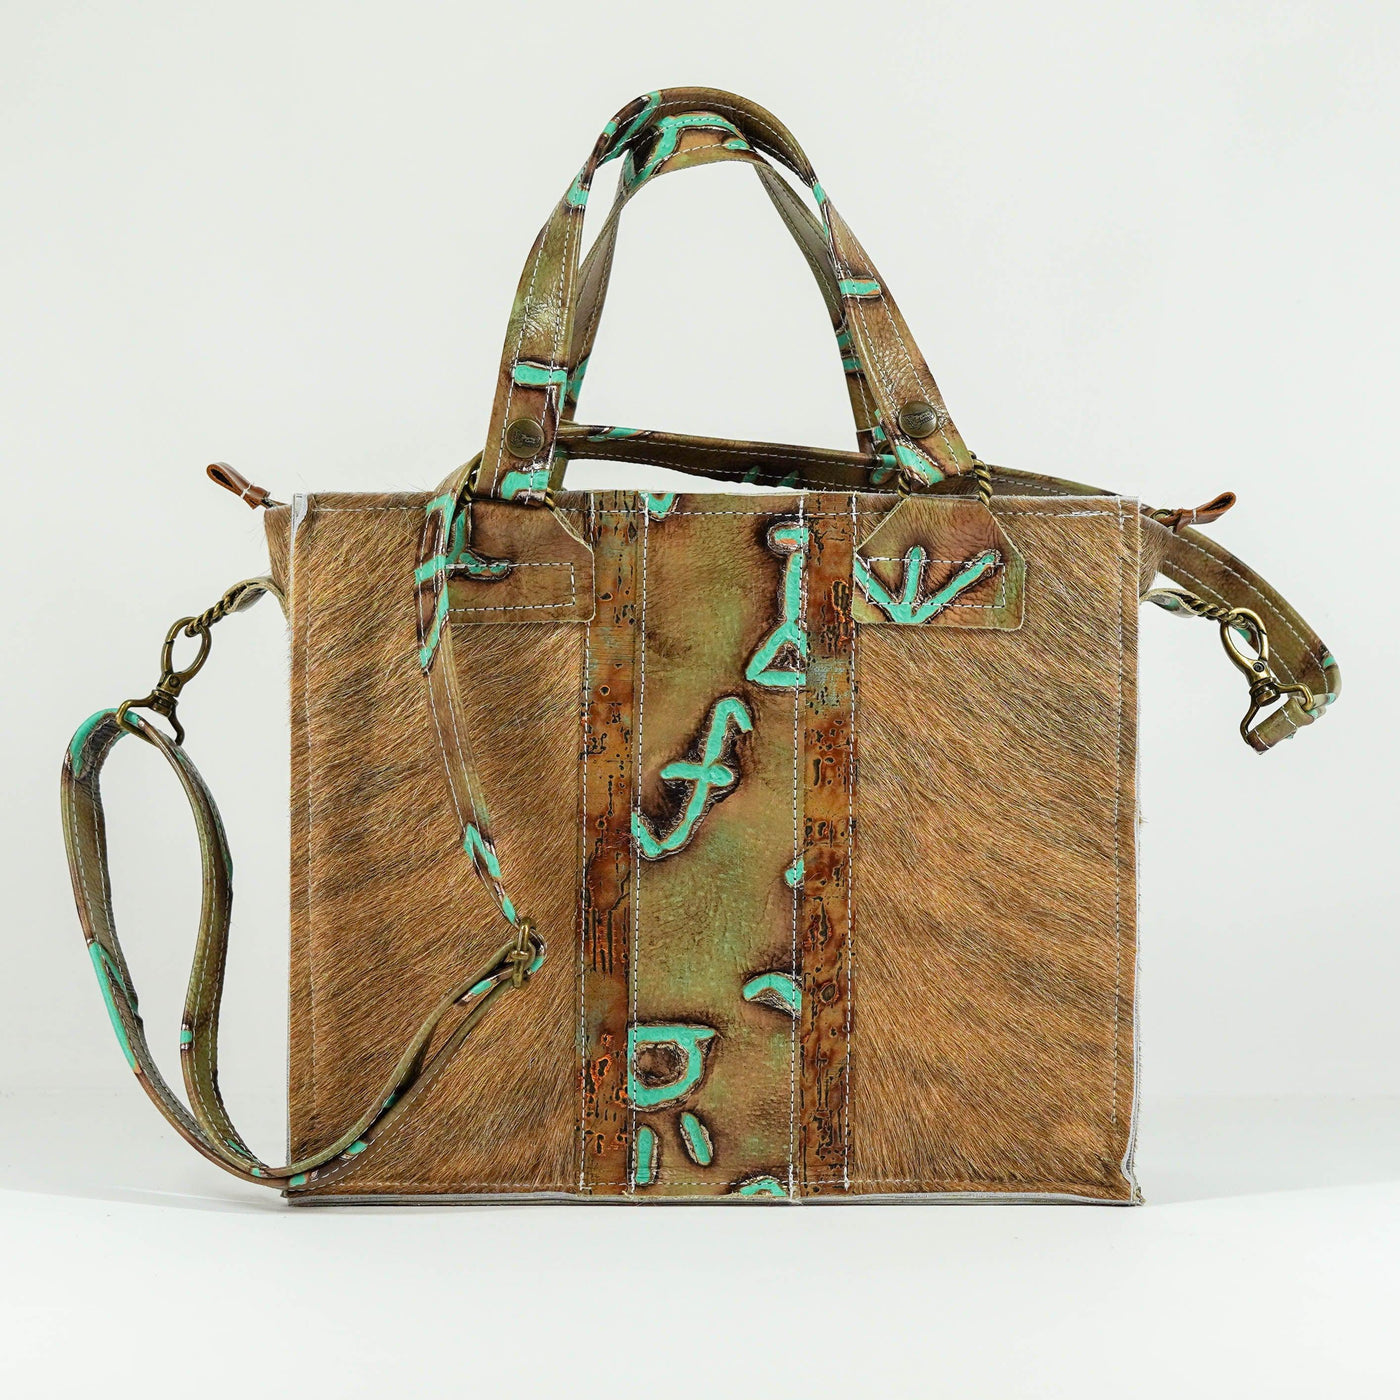 Minnie Pearl - Dusty Brindle w/ Turquoise Brands & Driftwood-Minnie Pearl-Western-Cowhide-Bags-Handmade-Products-Gifts-Dancing Cactus Designs